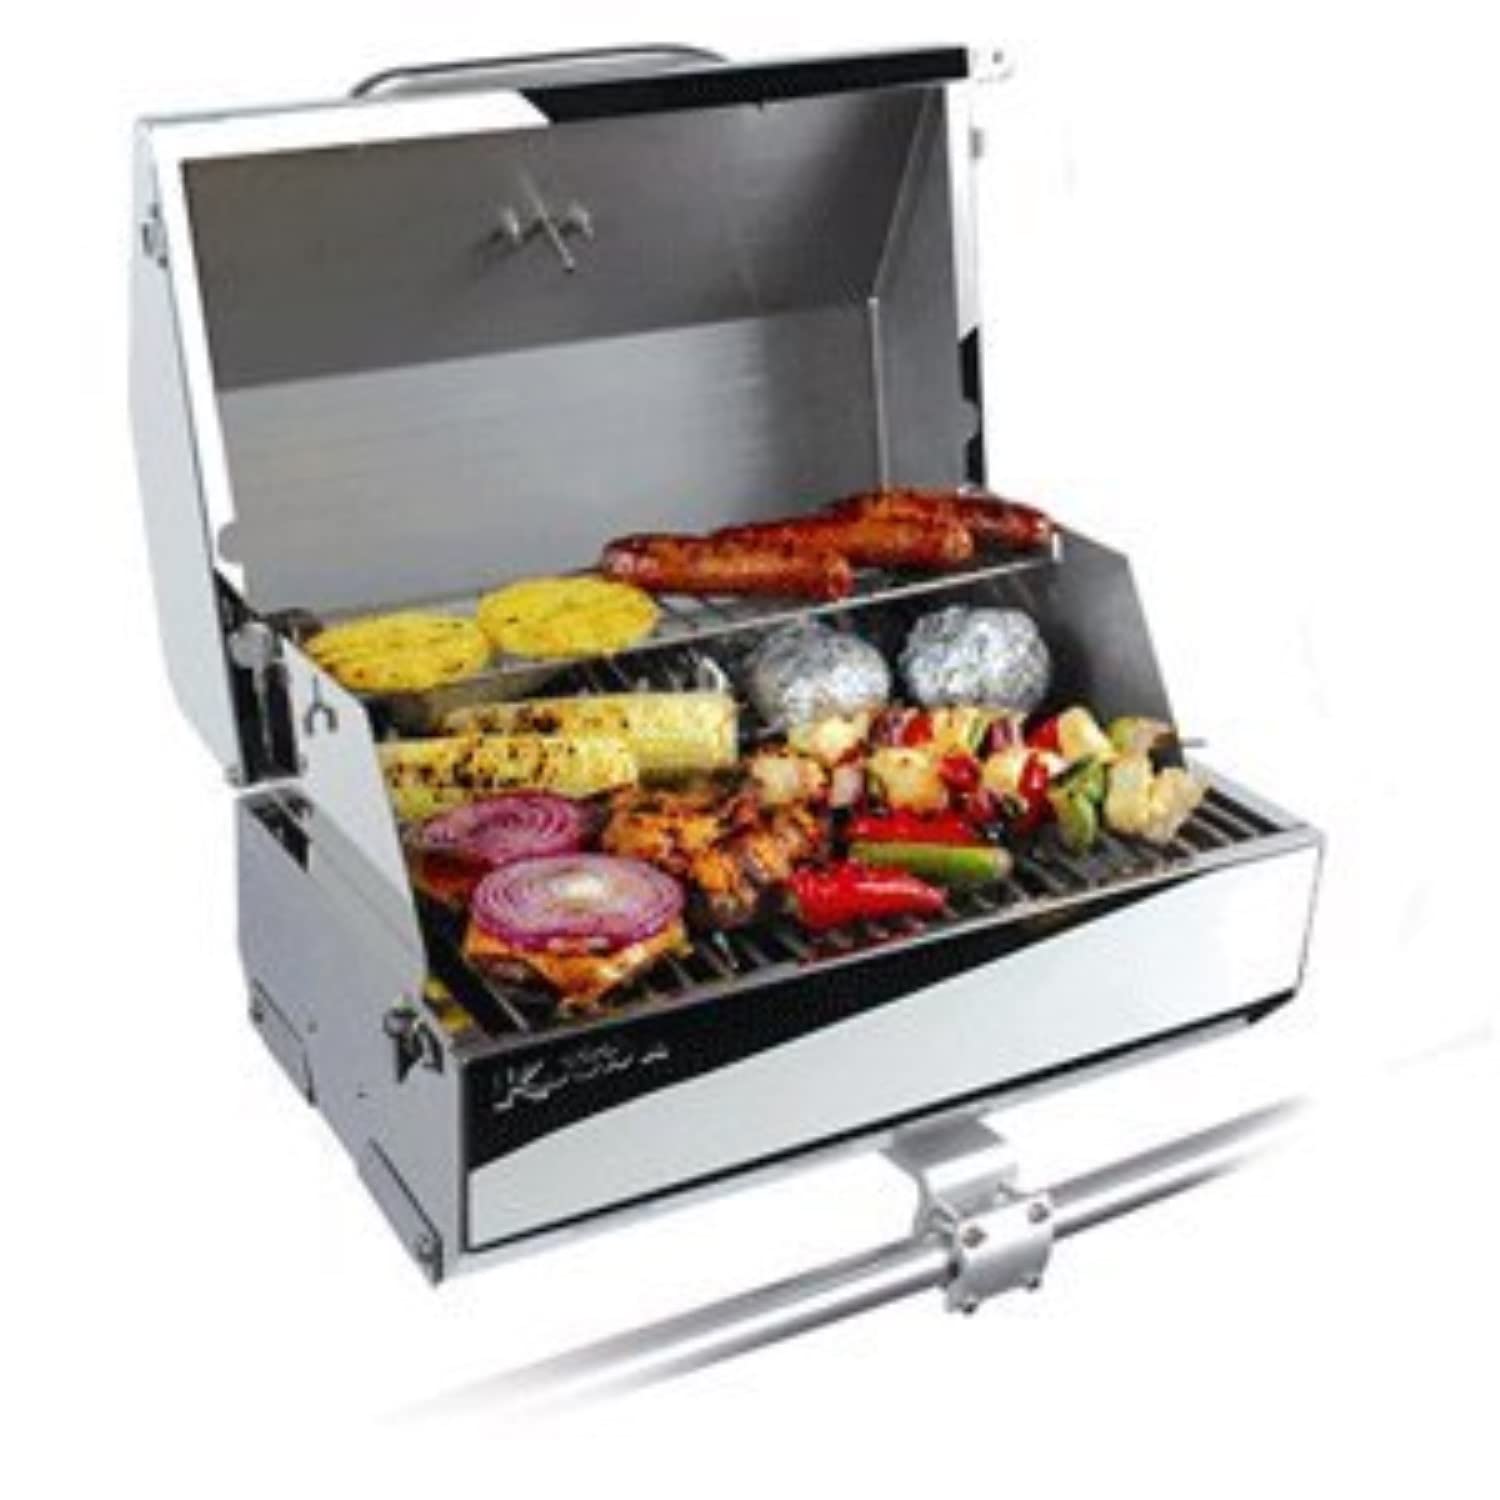 Camco Kuuma Products 58155 216 Elite Gas Grill Cooking Surface Stainless Steel- 216 in.